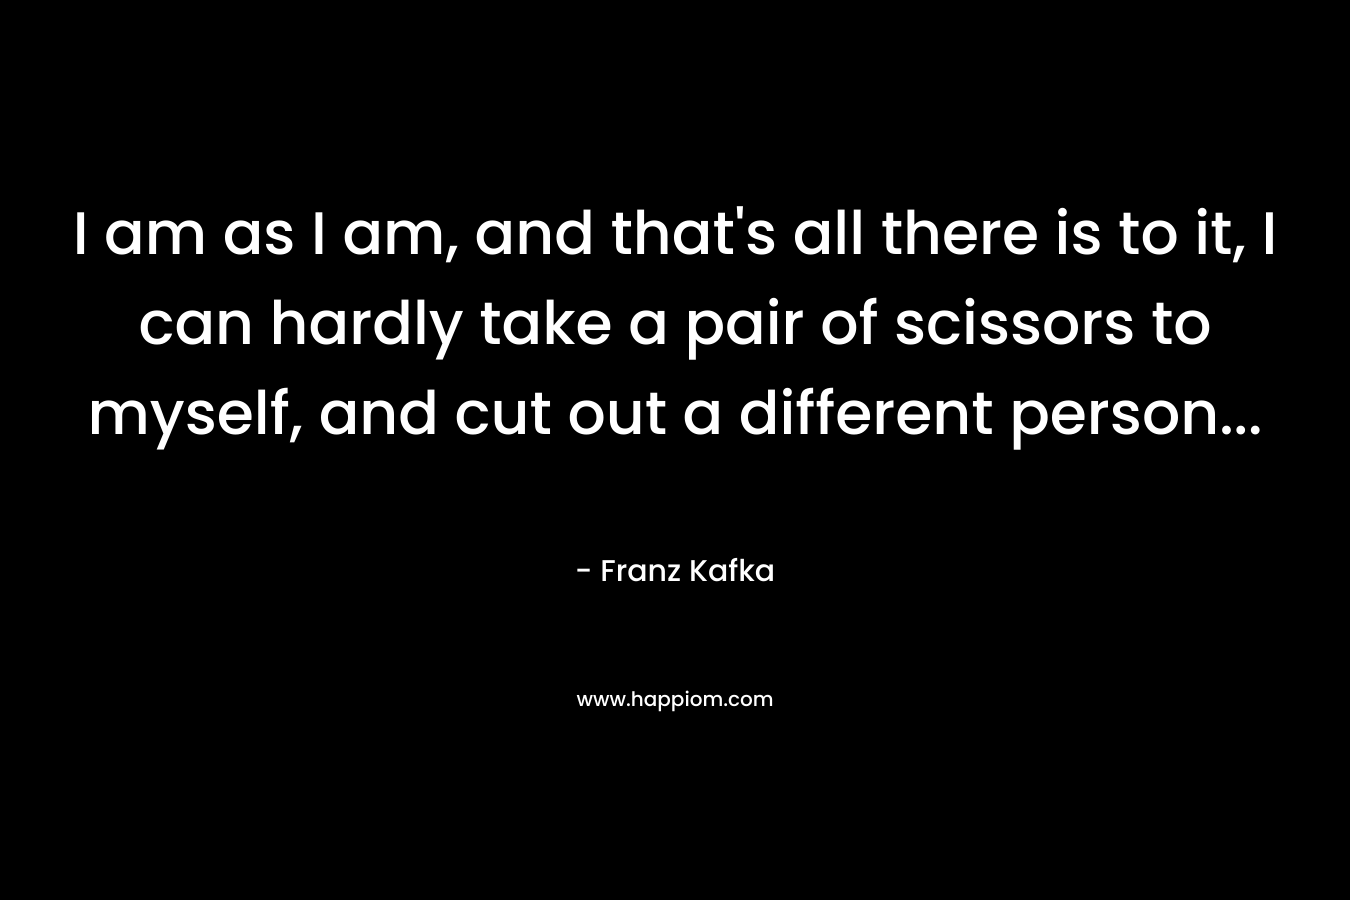 I am as I am, and that's all there is to it, I can hardly take a pair of scissors to myself, and cut out a different person...